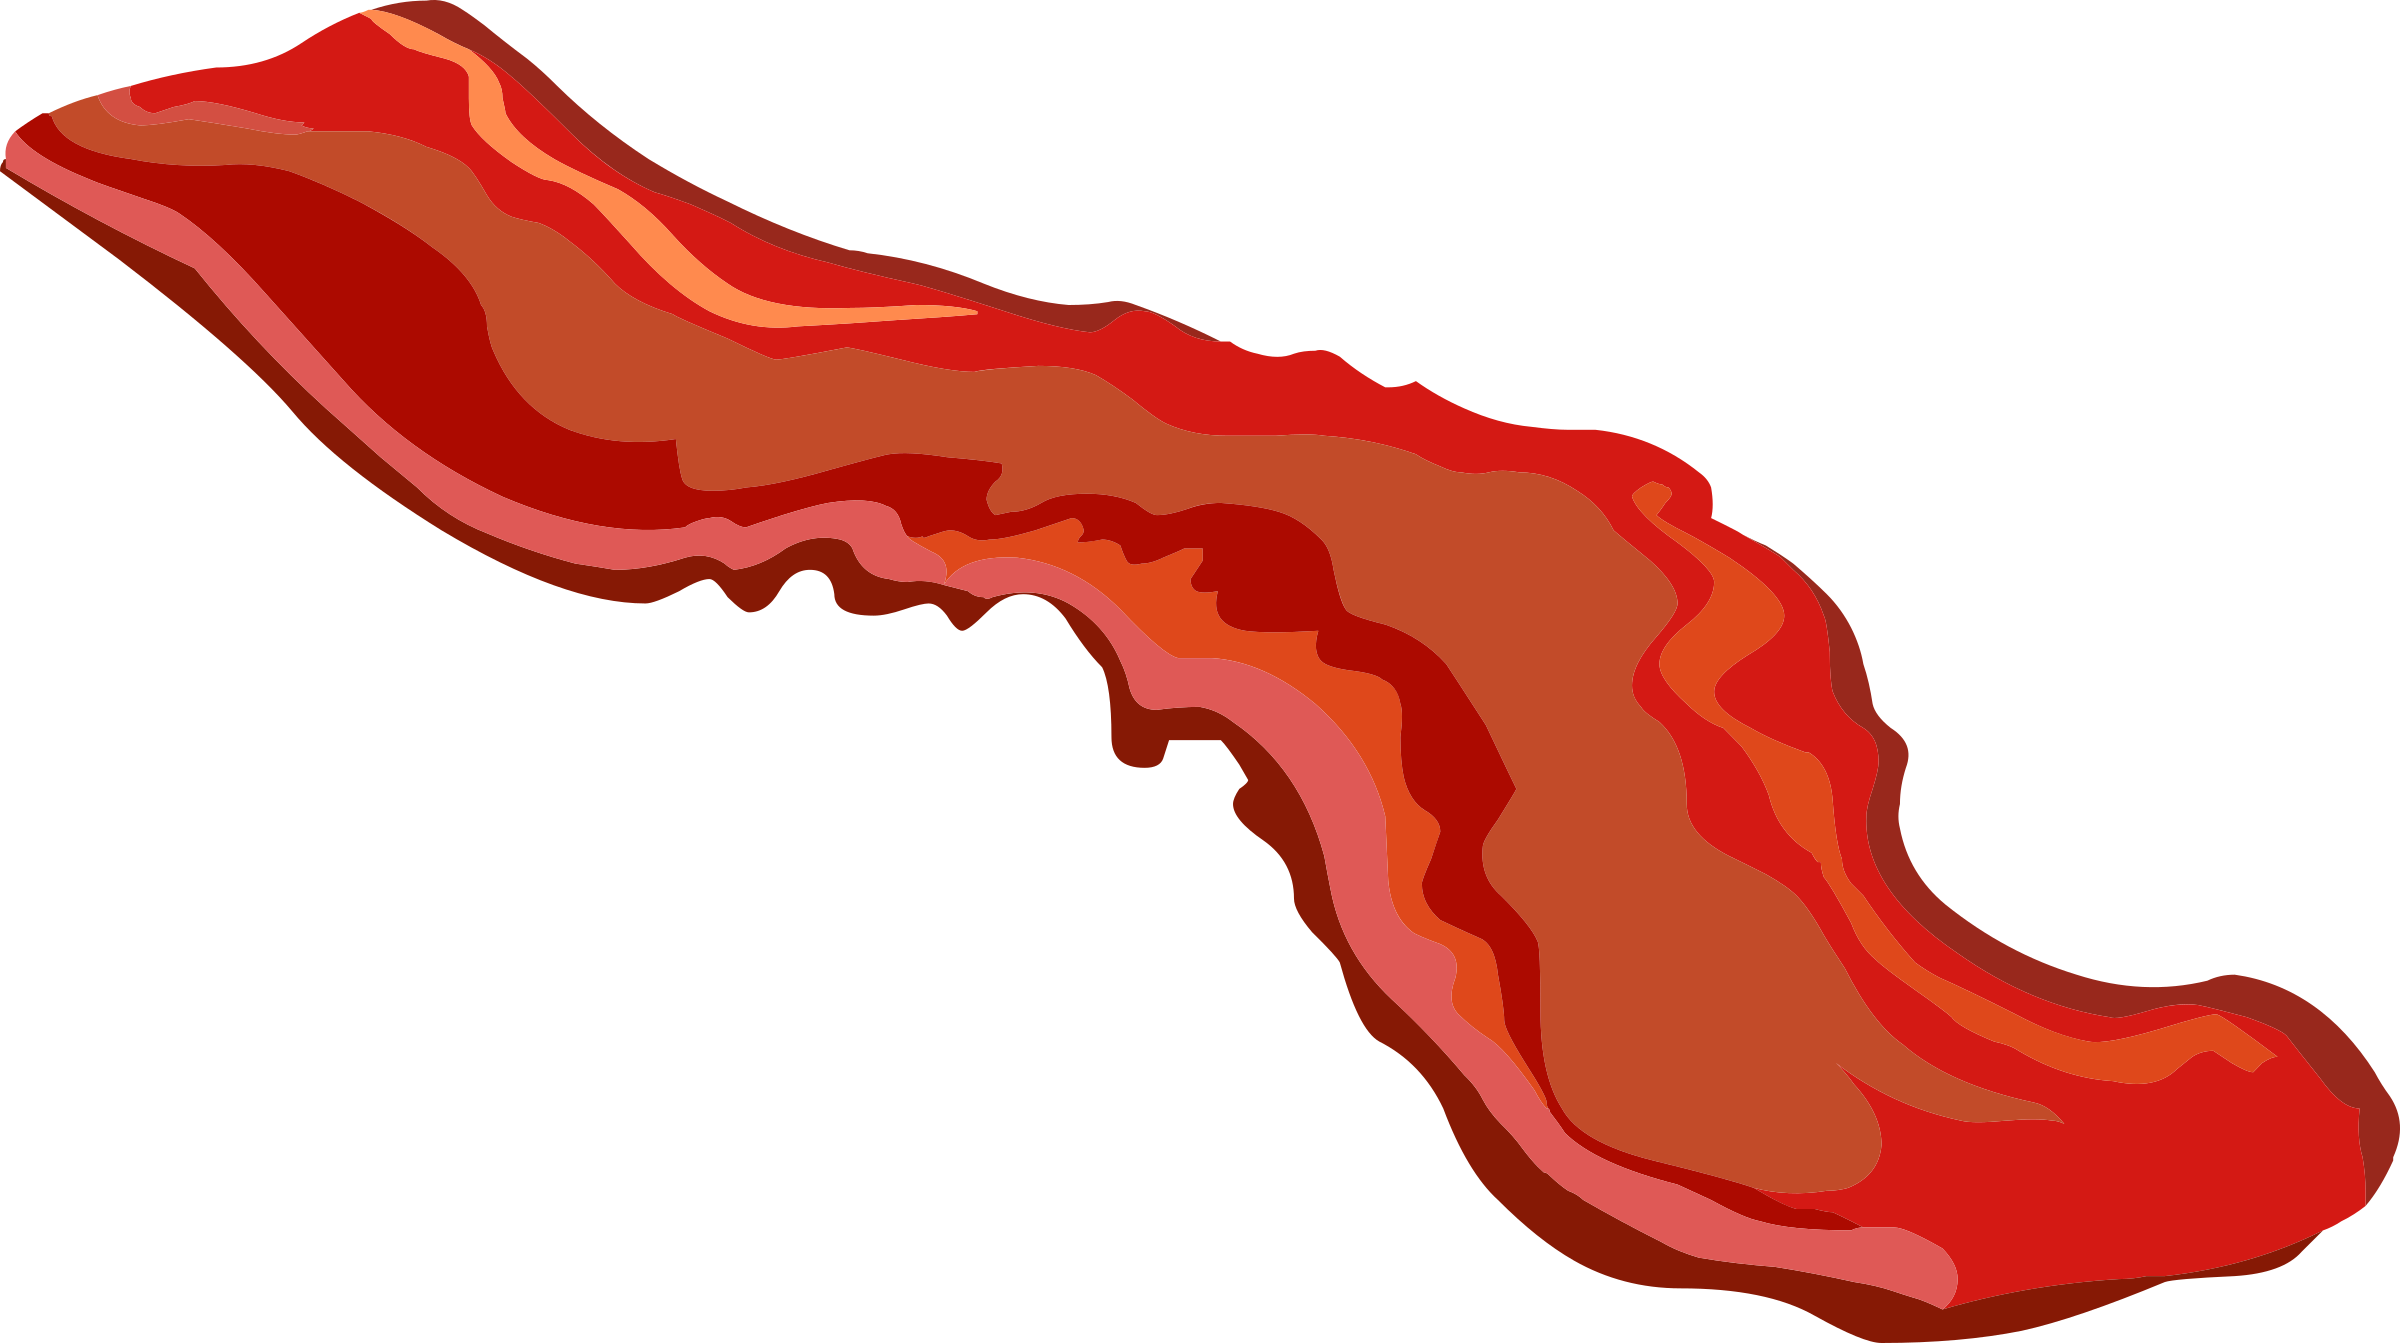 Bacon PNG HD Free - 127774